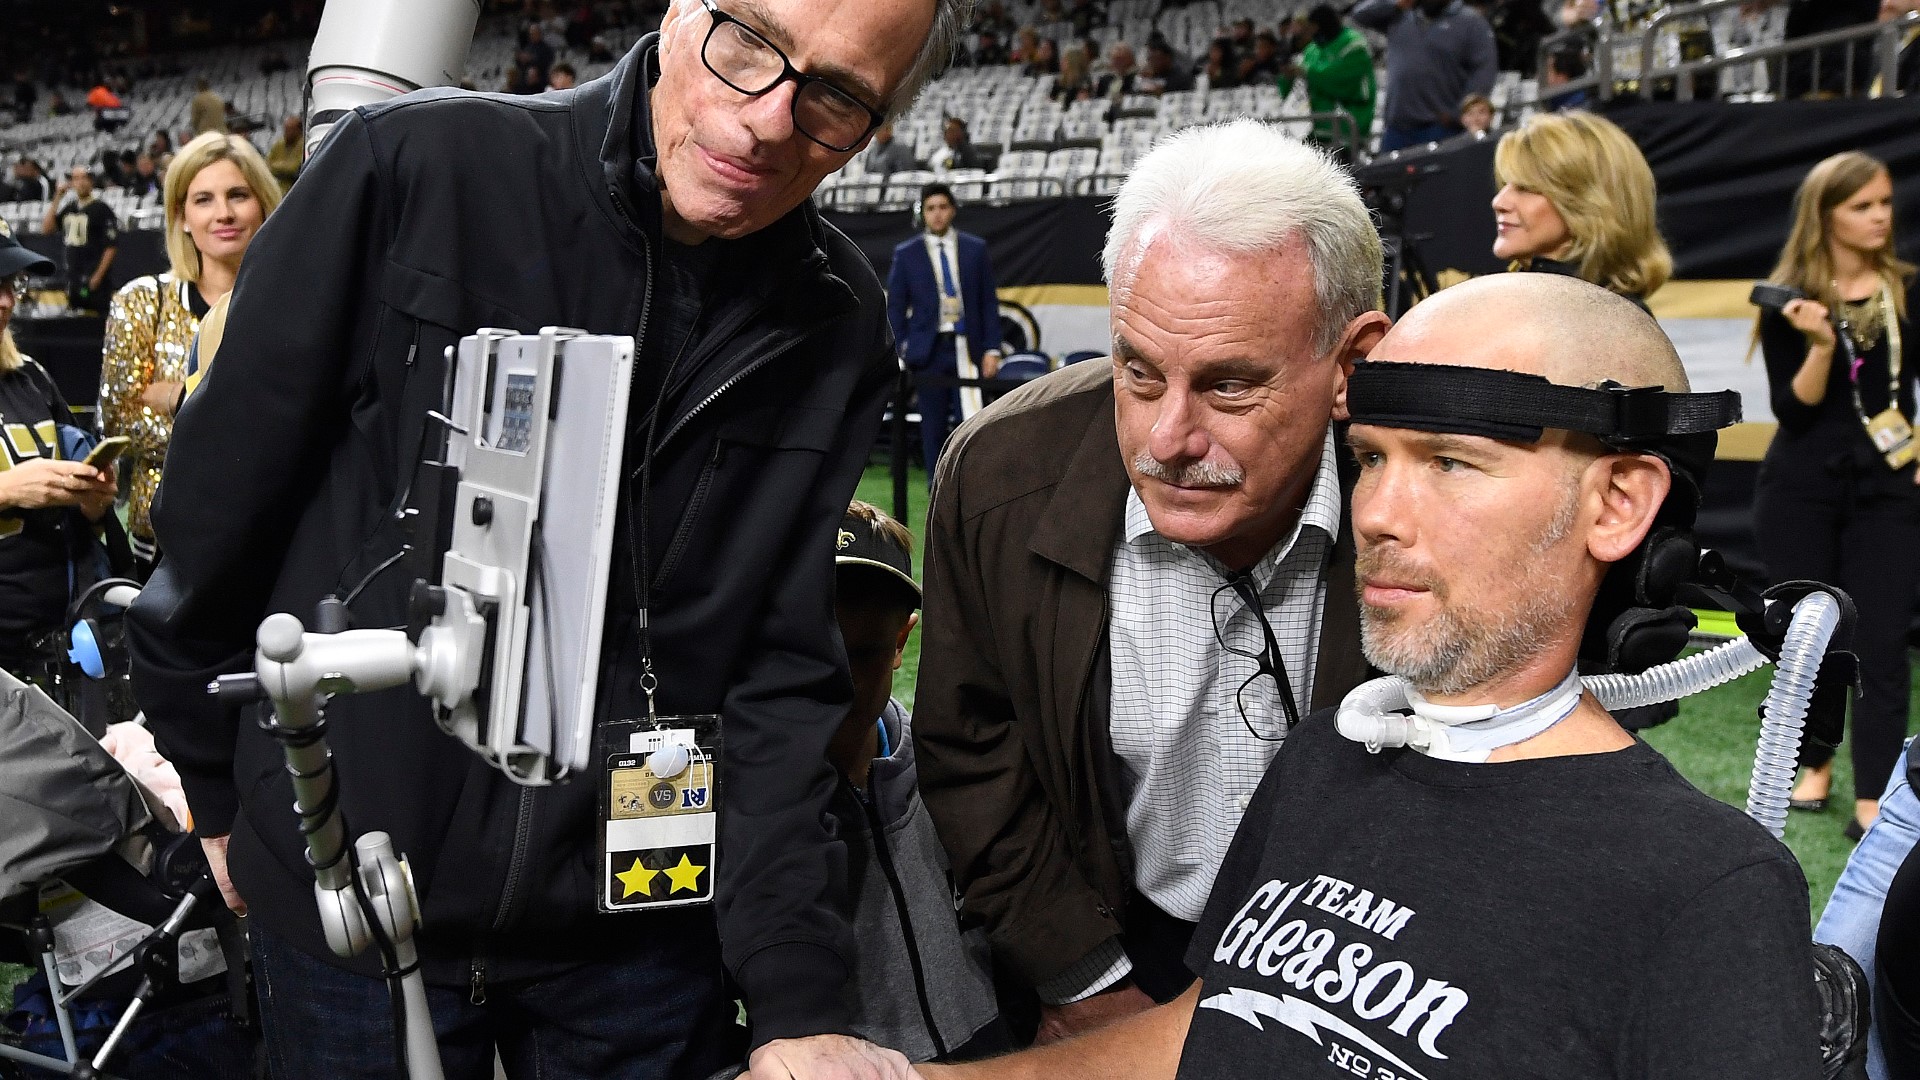 Steve Gleason said a family trip almost did not happen because employees were allegedly unwilling to accommodate his powered wheelchair and specialty equipment.